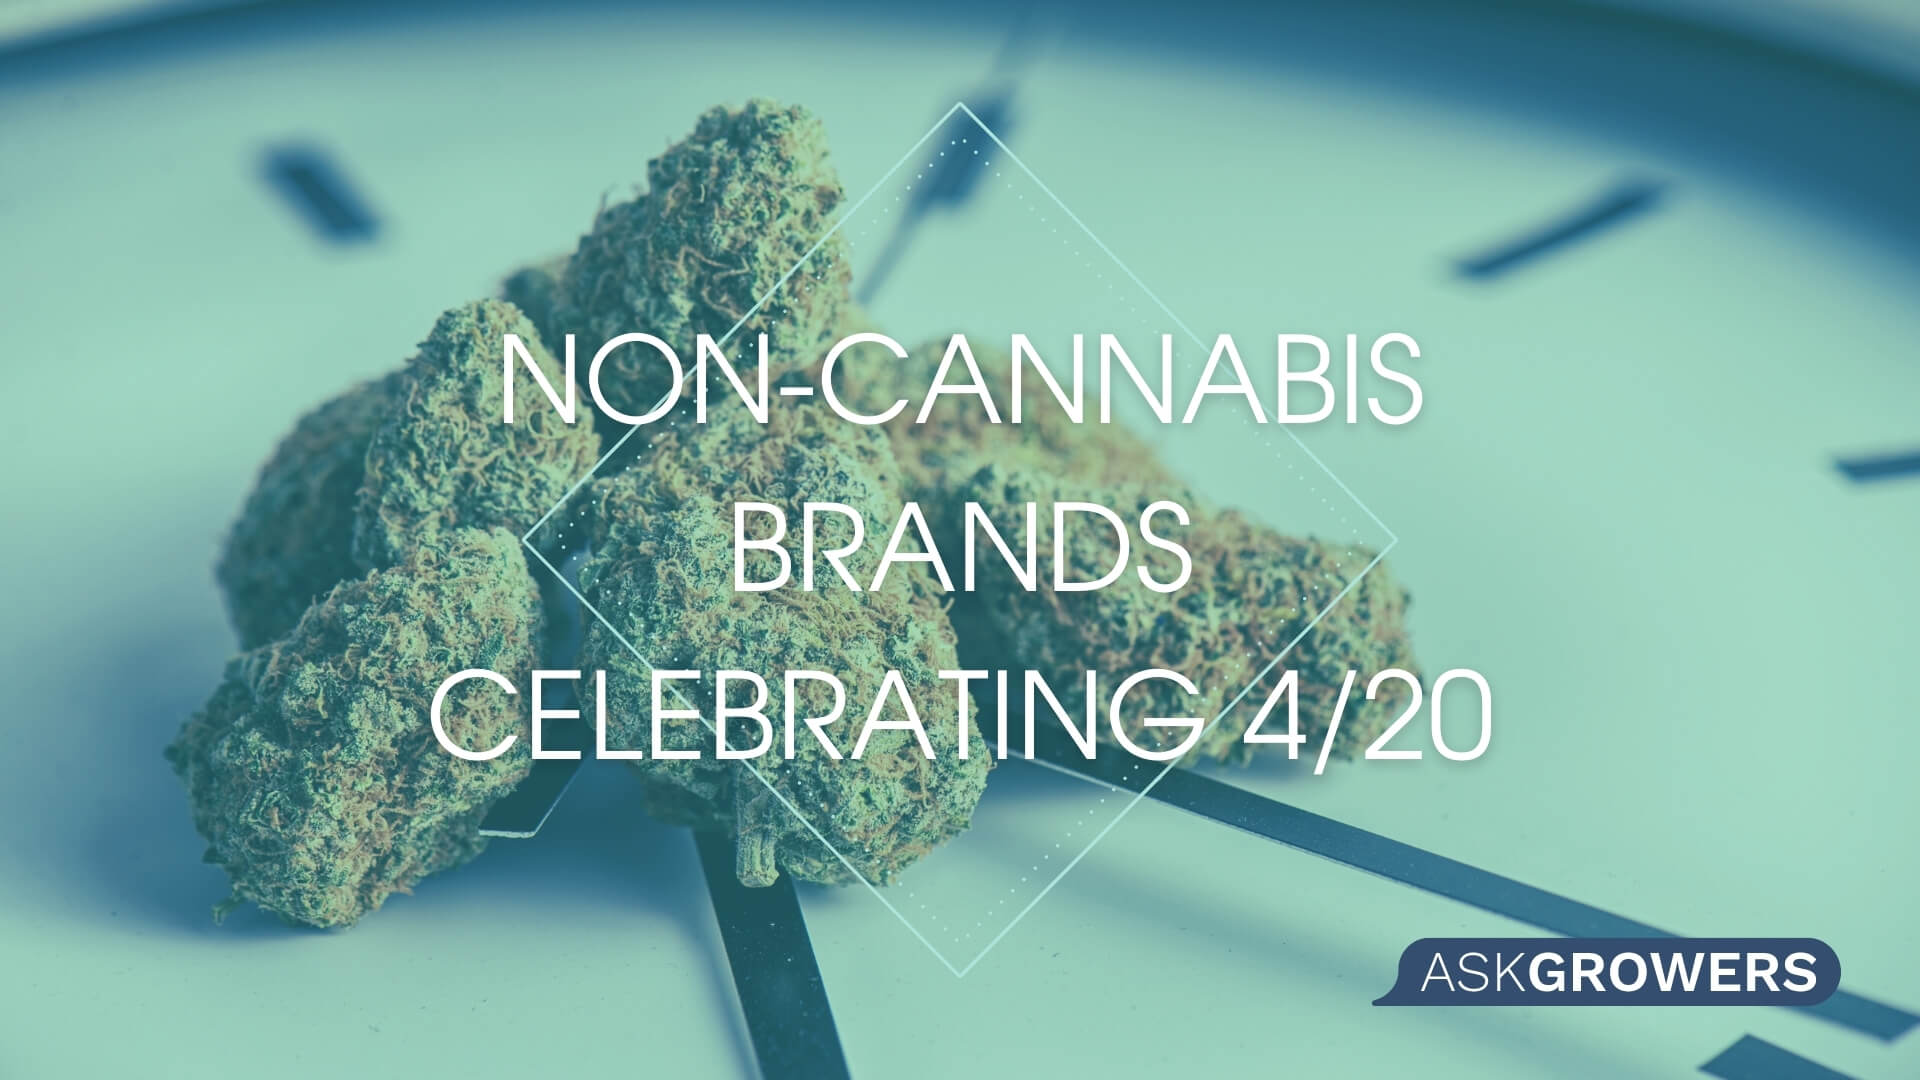 Non-Cannabis Brands' Communications to 4/20 Day in 2020